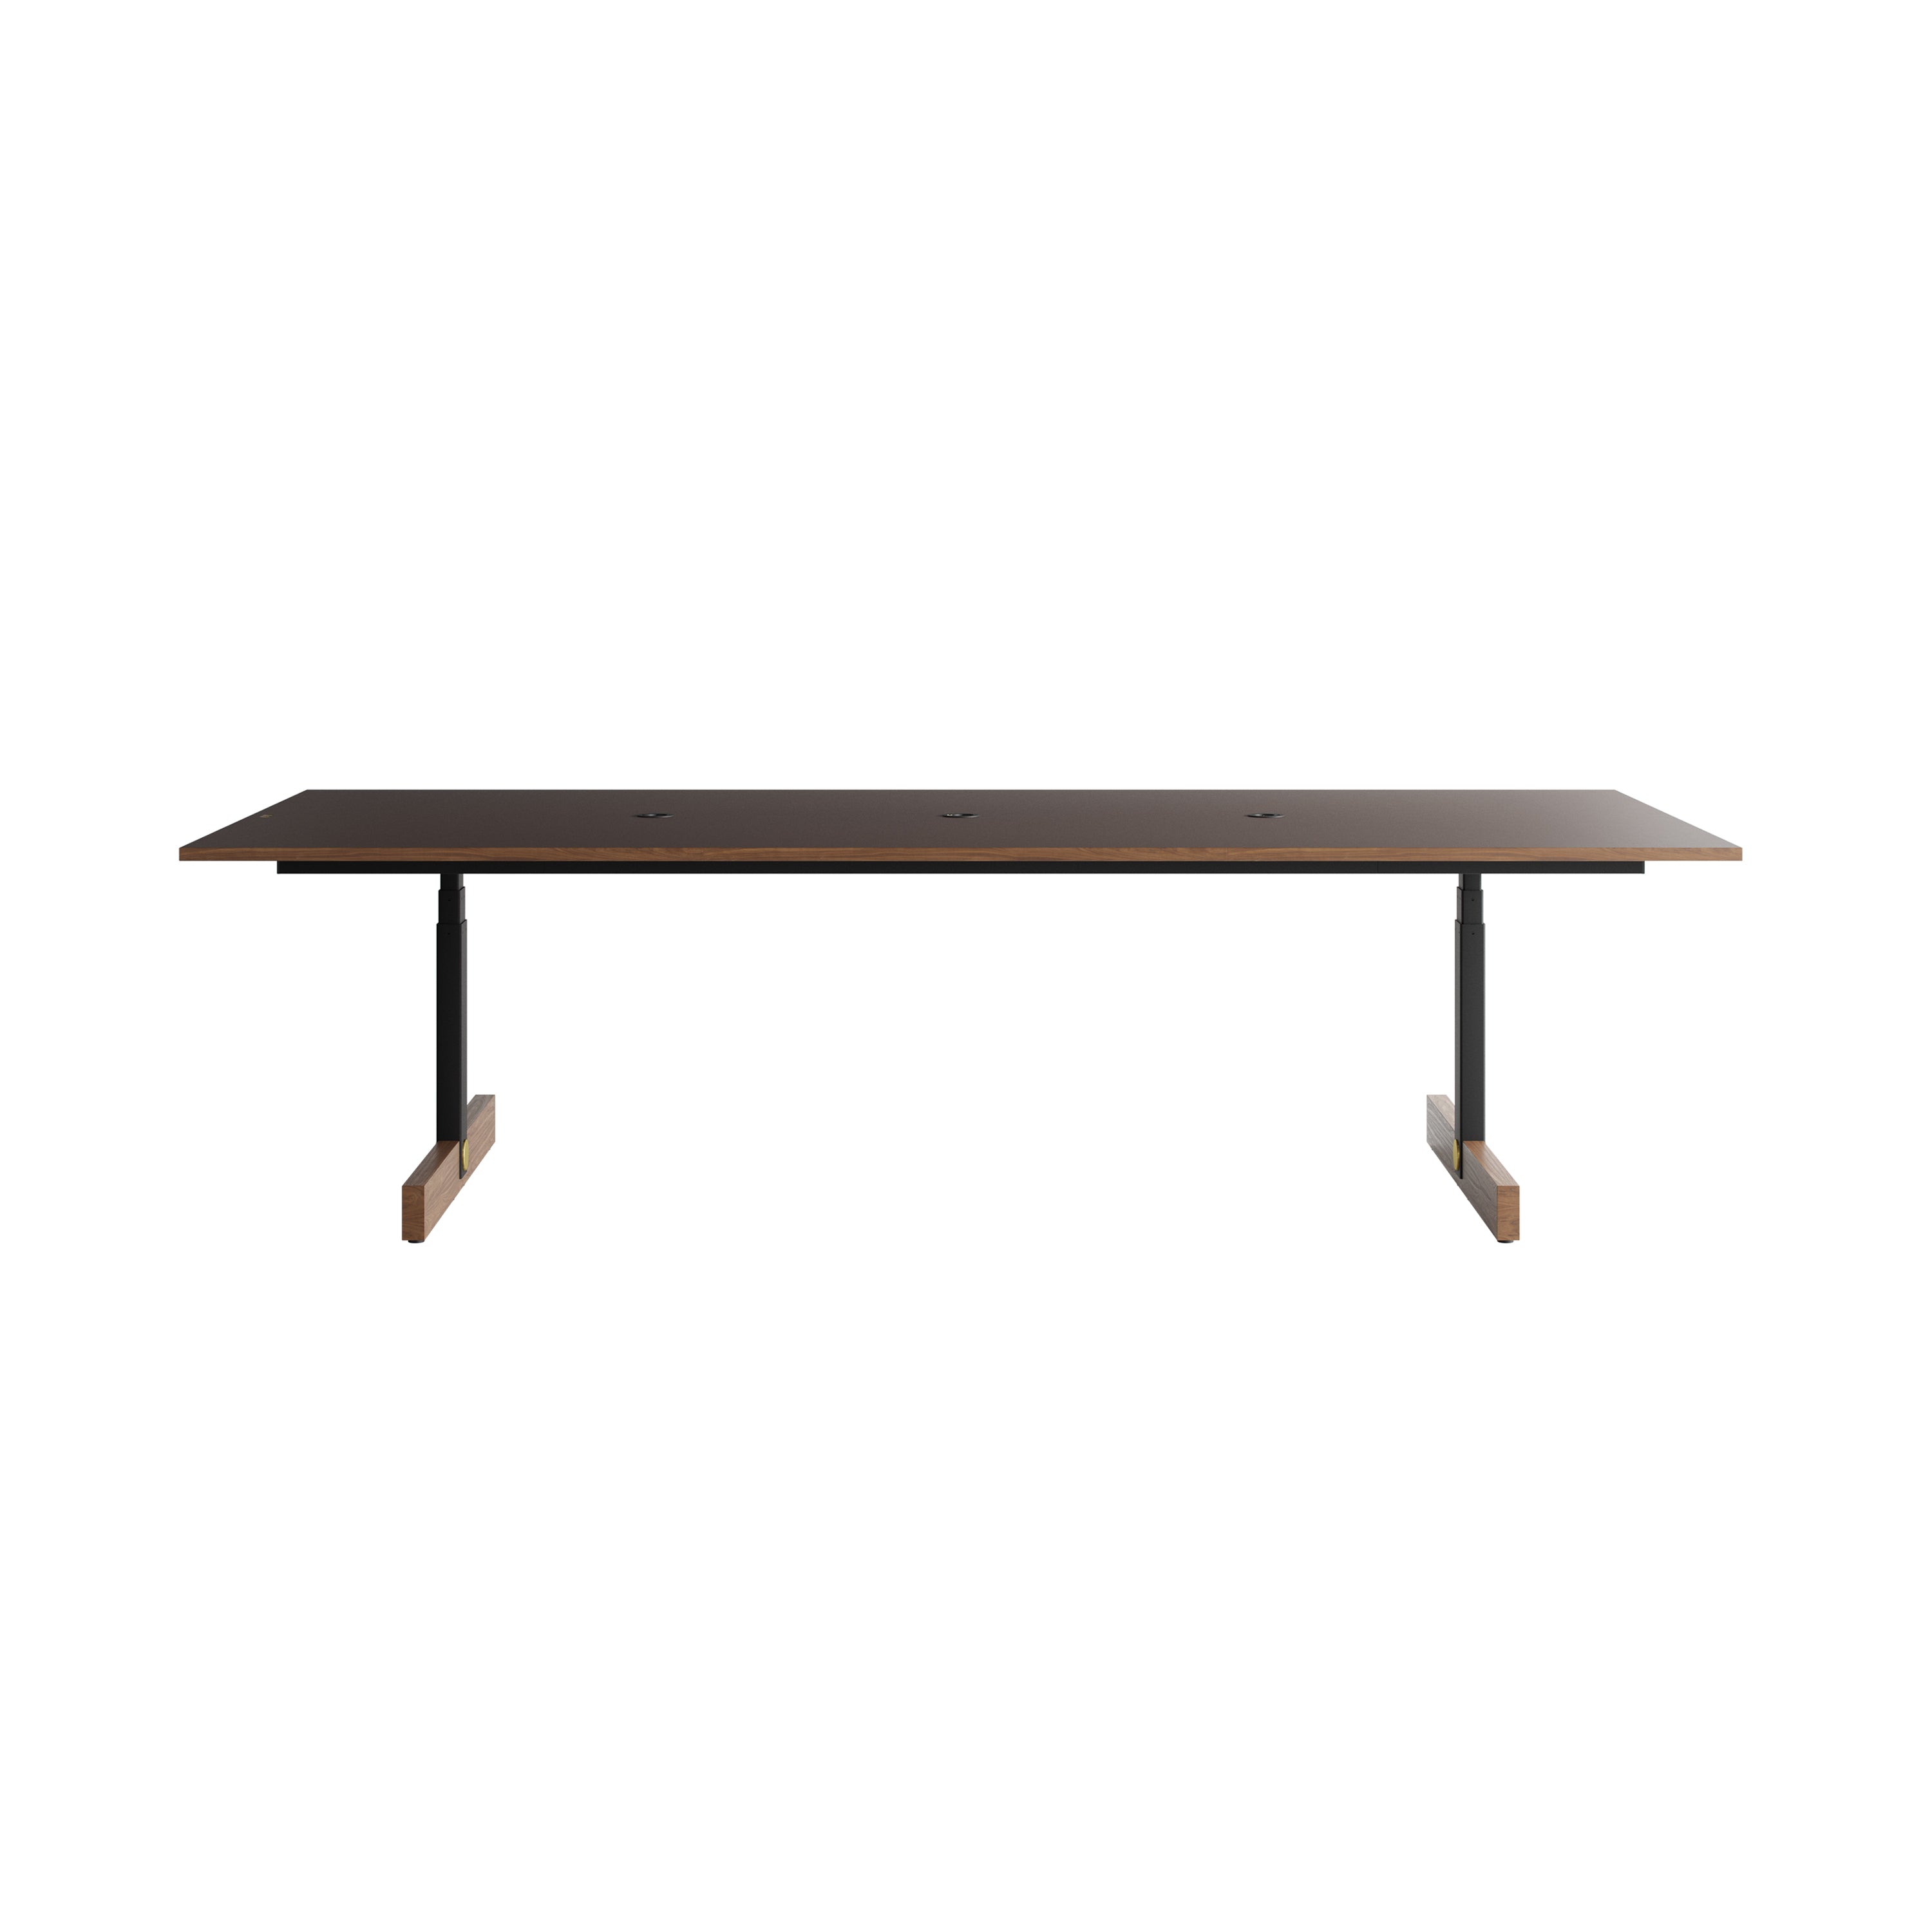 Coinz Height Adjustable Conference Table: Small - 47.2